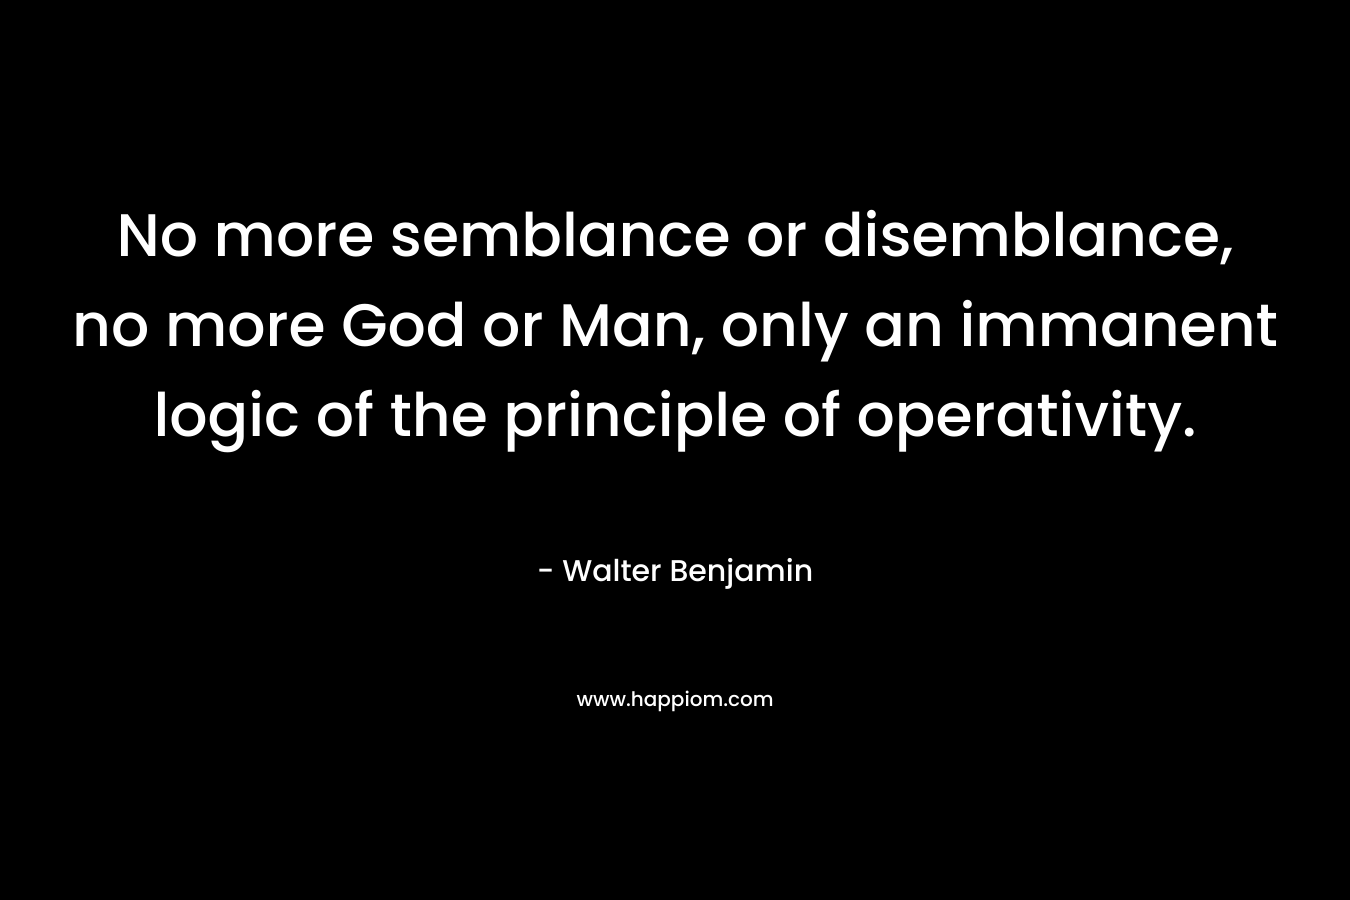 No more semblance or disemblance, no more God or Man, only an immanent logic of the principle of operativity. – Walter Benjamin